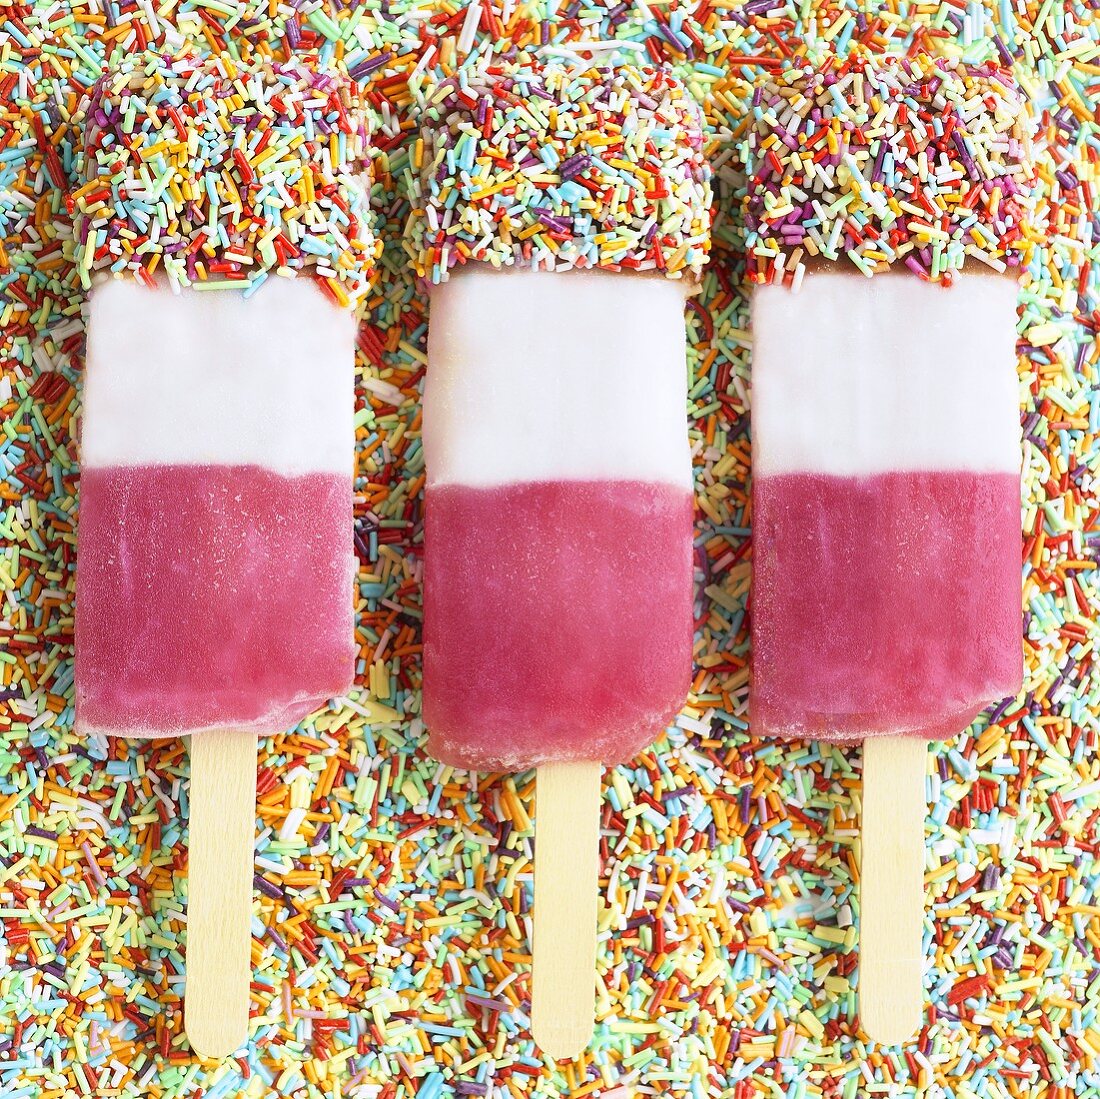 Ice lollies with coloured sprinkles